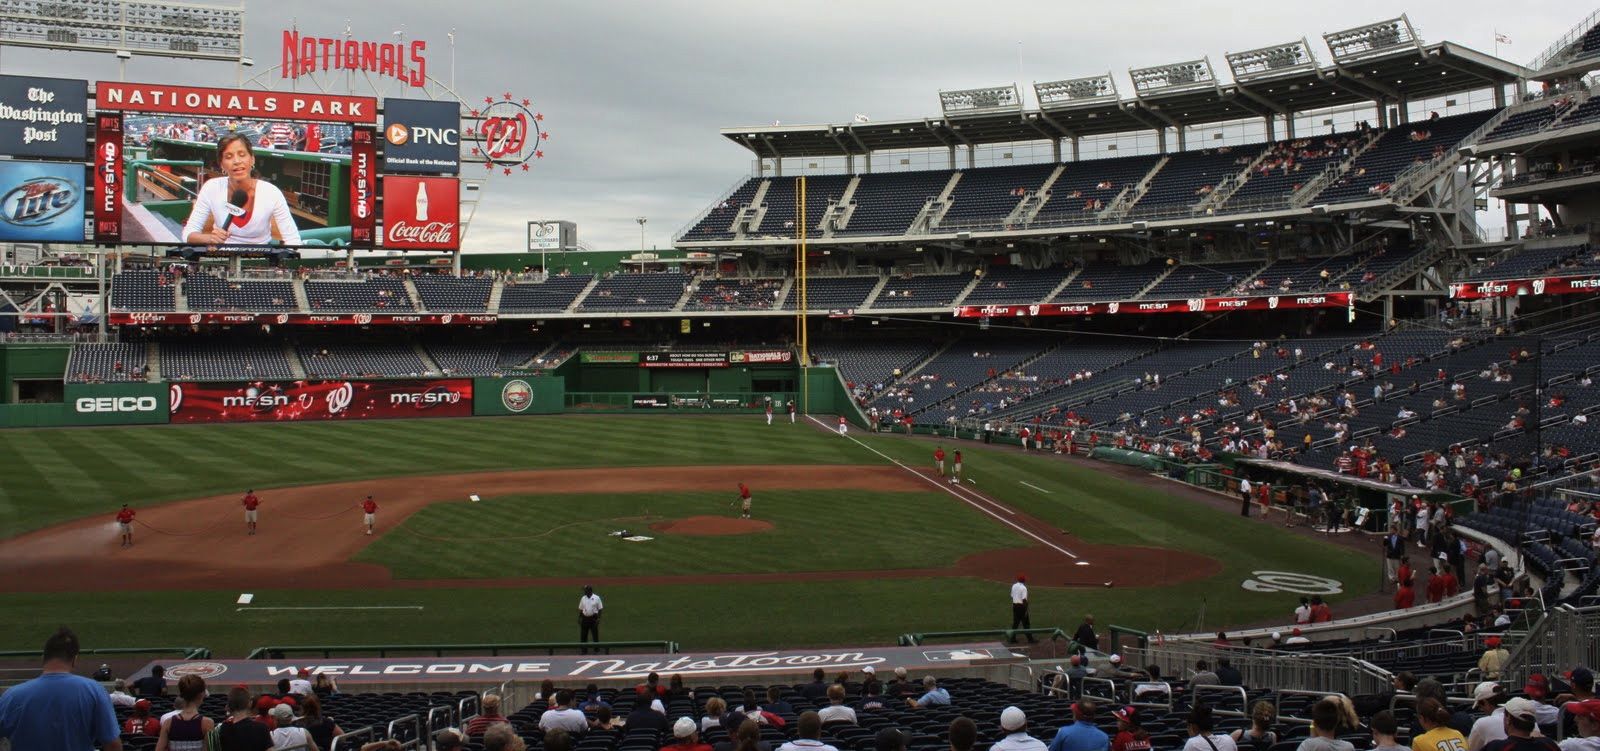 THIS WEEKEND: The Inaugural DC Beer Festival Comes to Nationals Park!